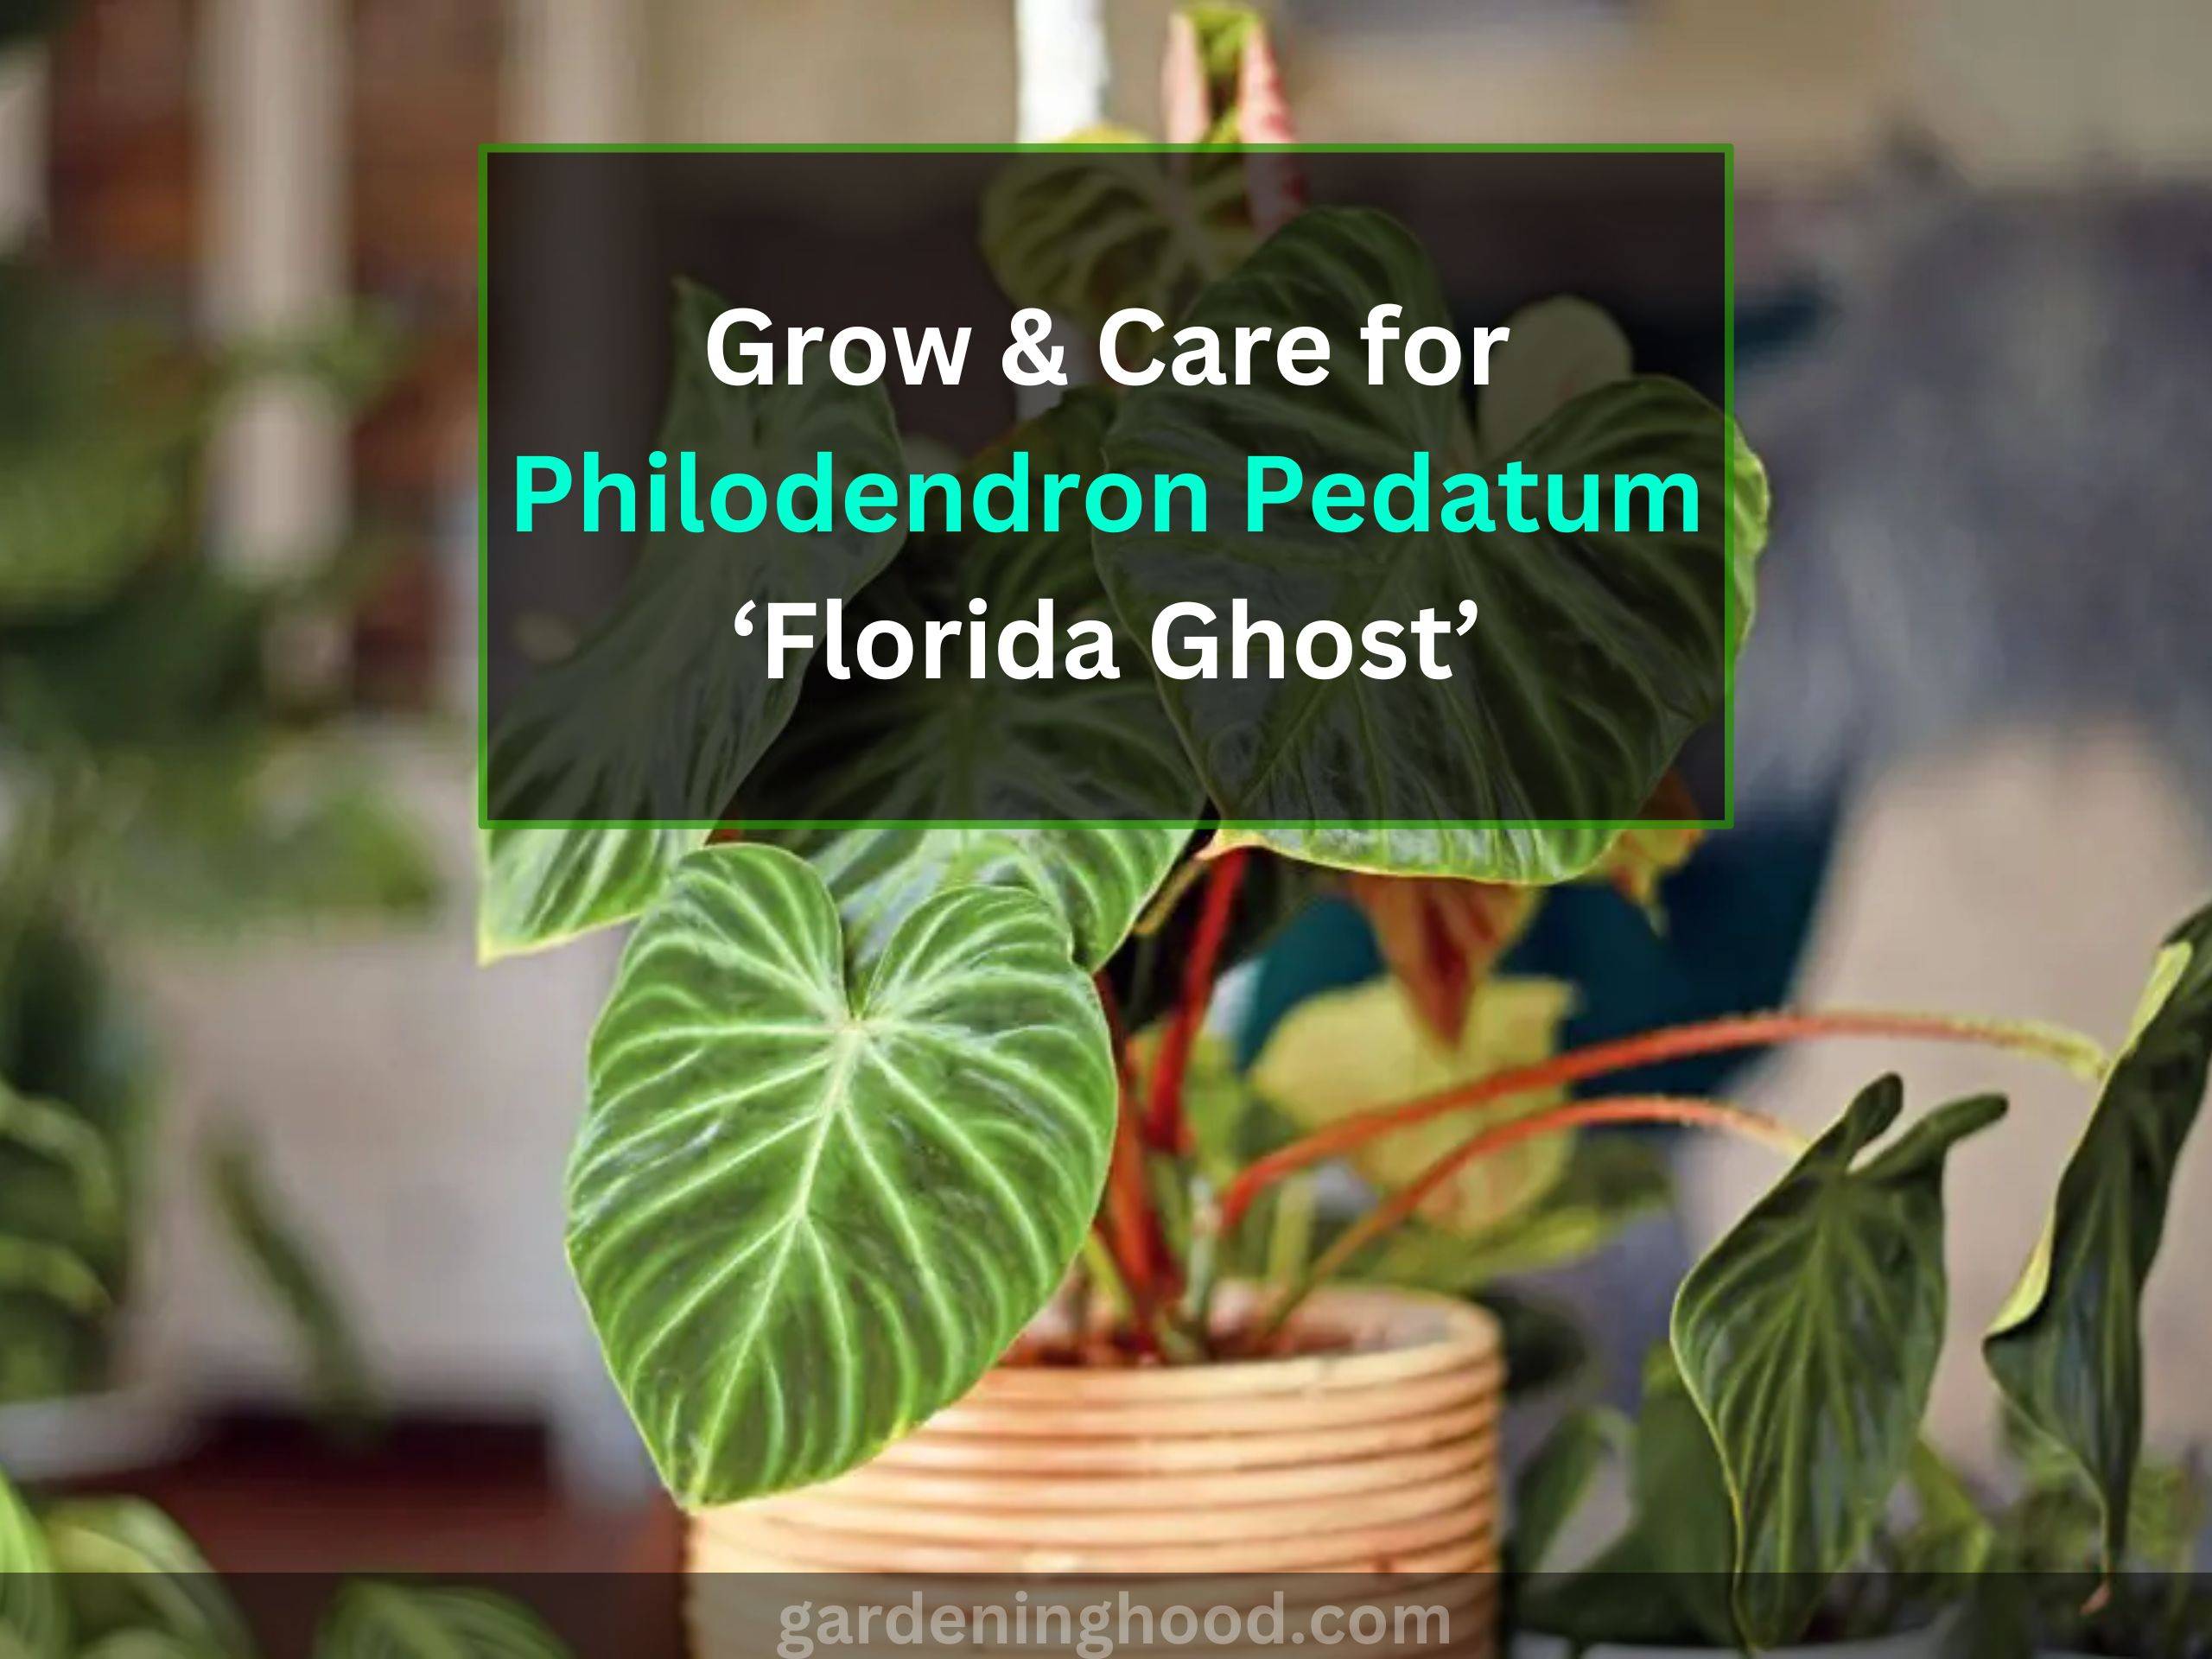 Grow & Care for Philodendron Pedatum ‘Florida Ghost’